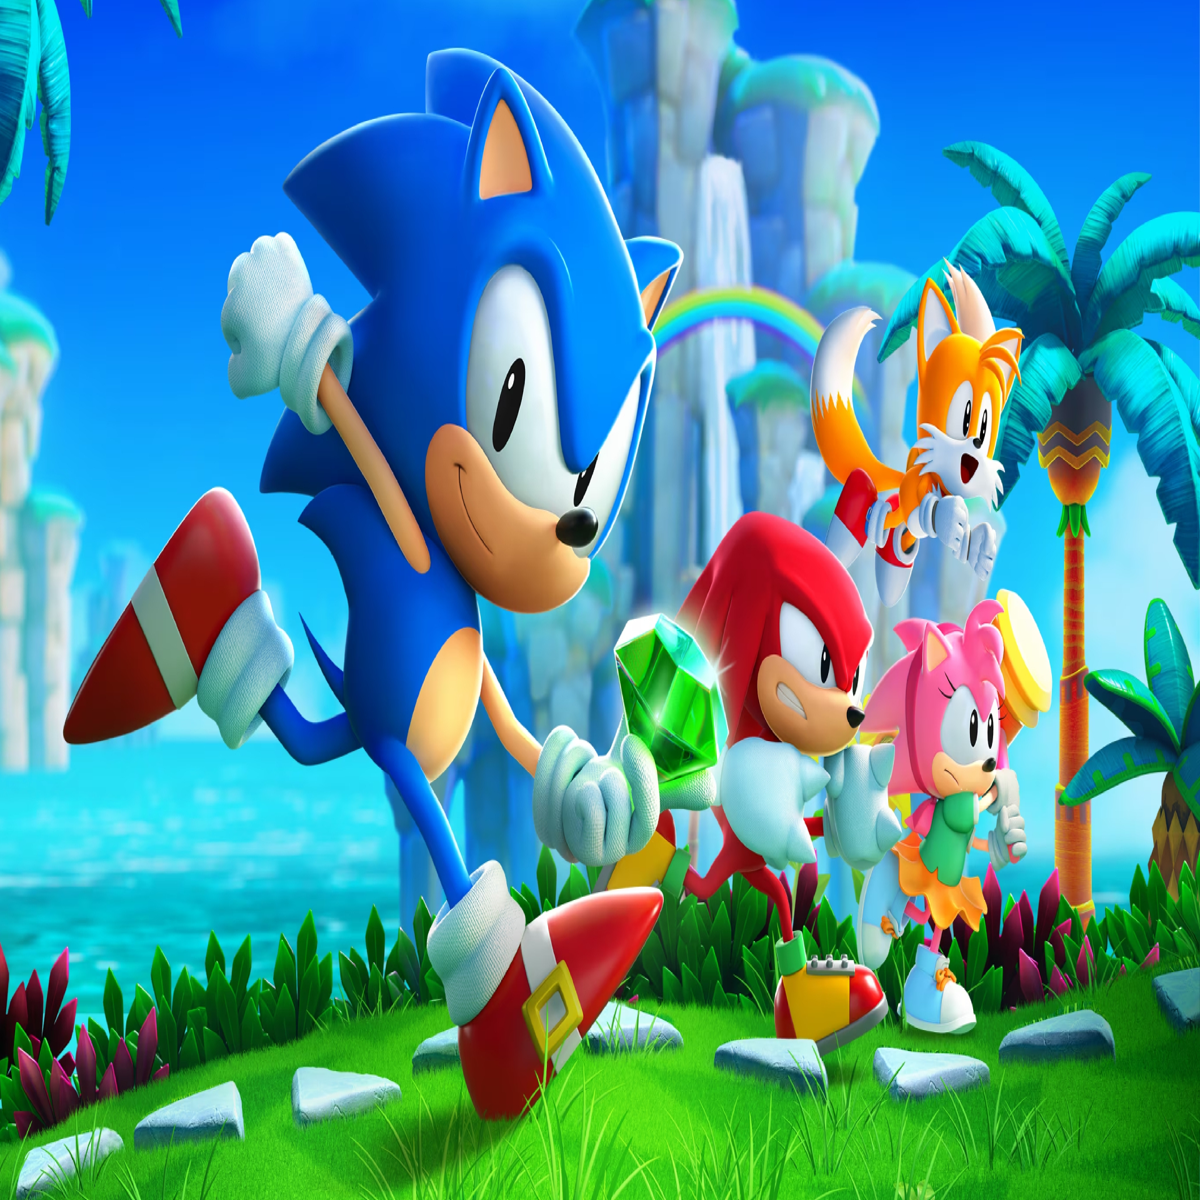 Sonic Superstars gets the all-important physics right – and the